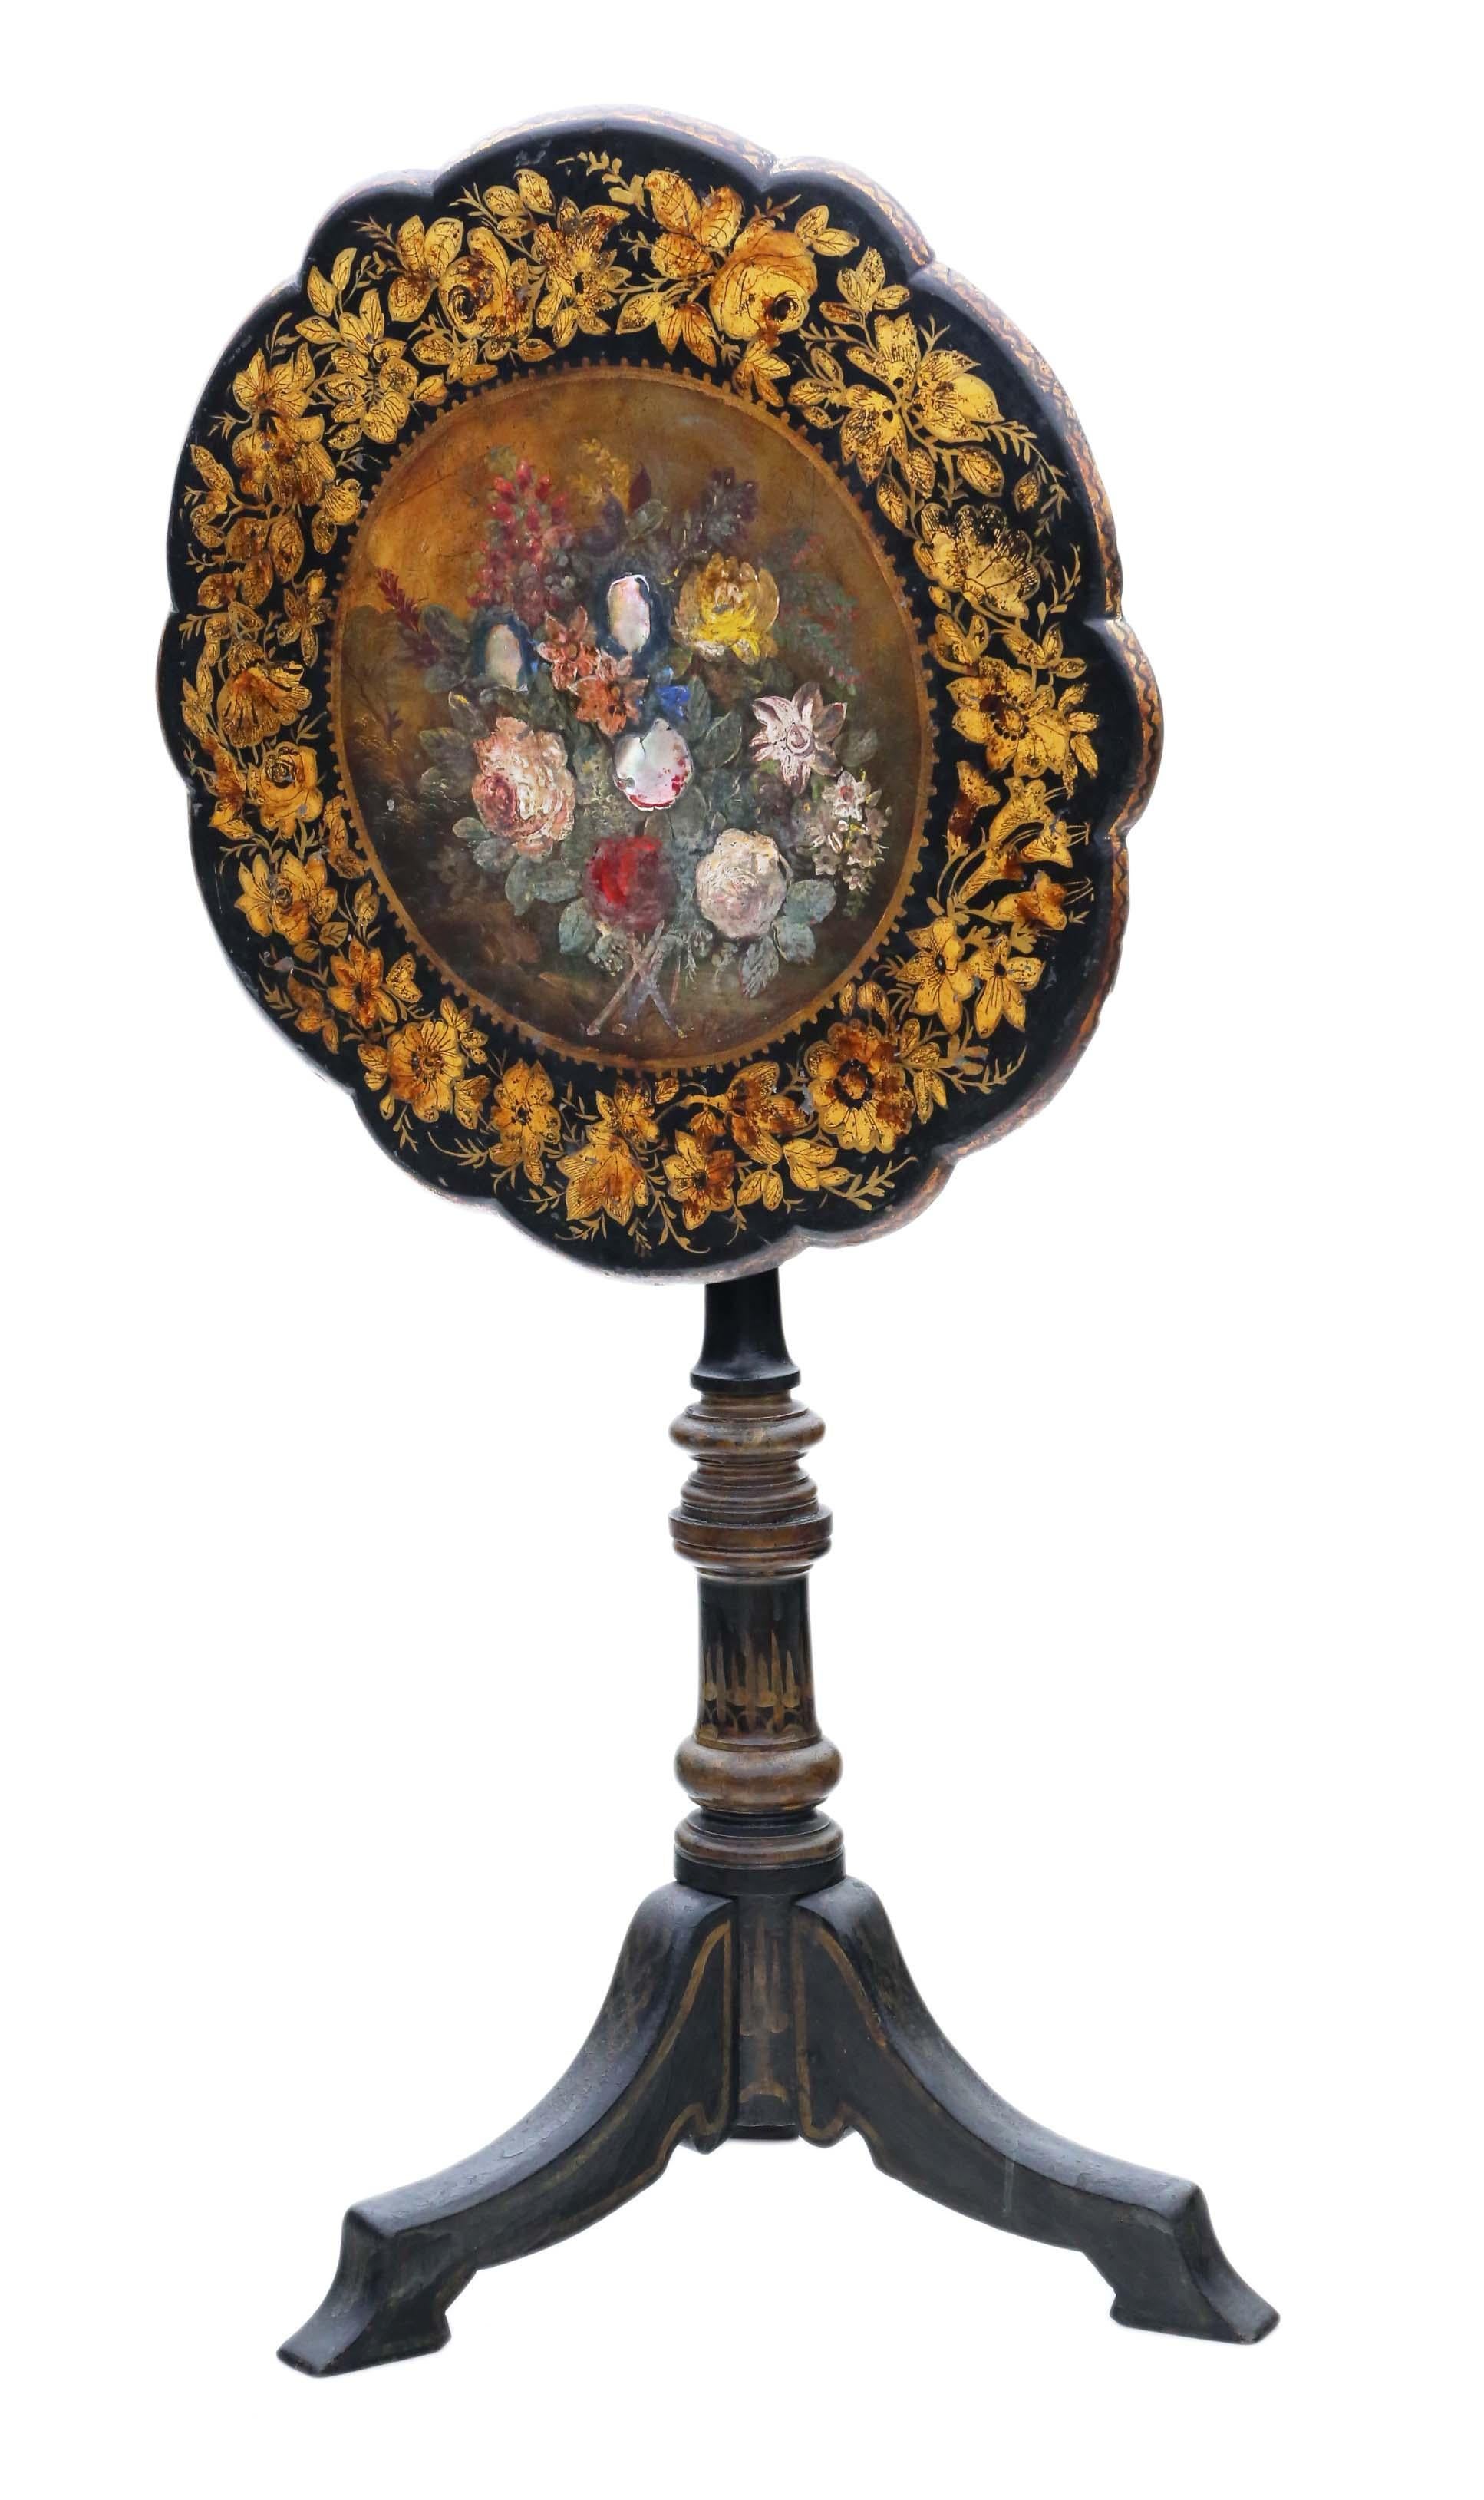 Antique quality Victorian 19th century hand decorated papier mache tilt top tea, side, supper, wine or occasional table.

This is a lovely table, that is full of age, charm and character.

Rare and attractive.

The table has no loose joints,